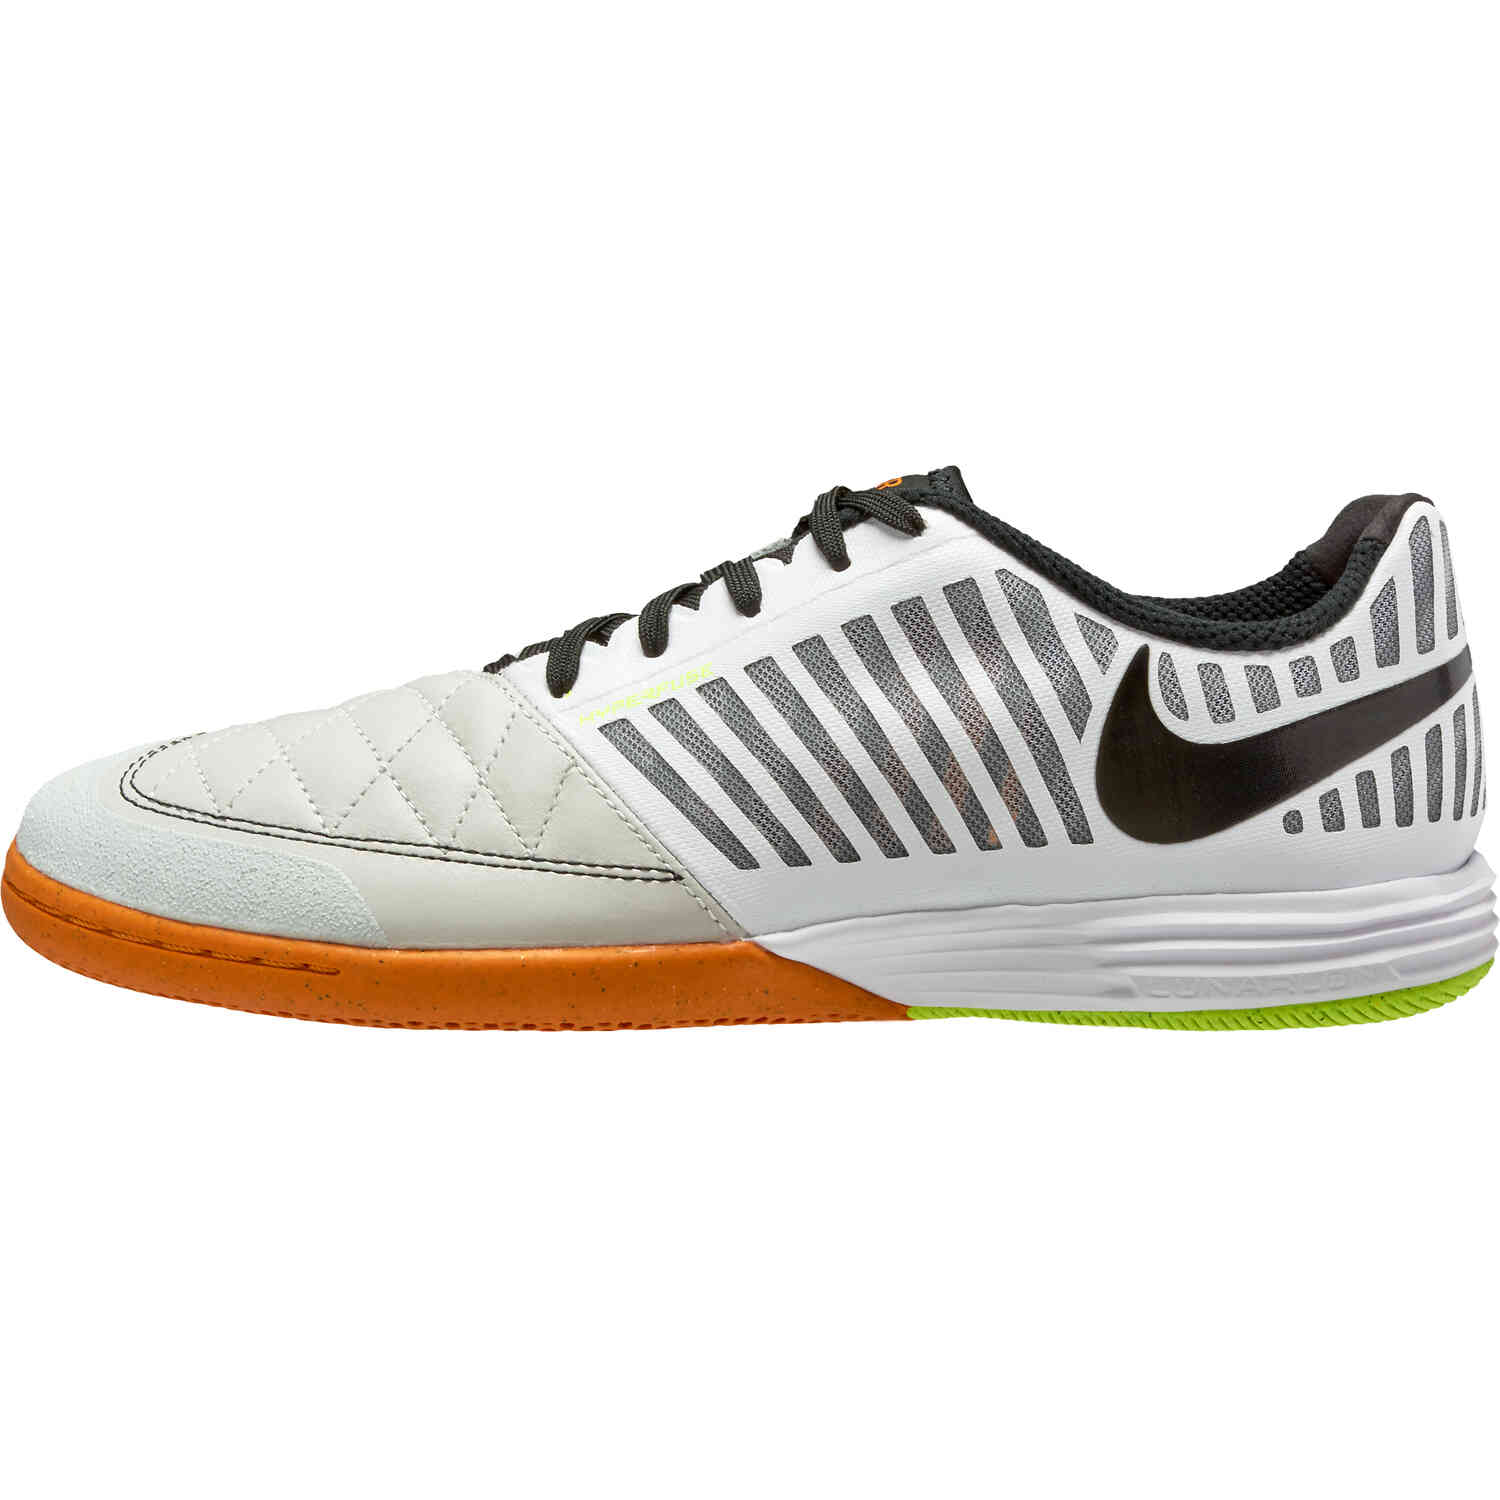 Nike Lunargato II IC - White & Black with Photon Dust with Light Curry ...